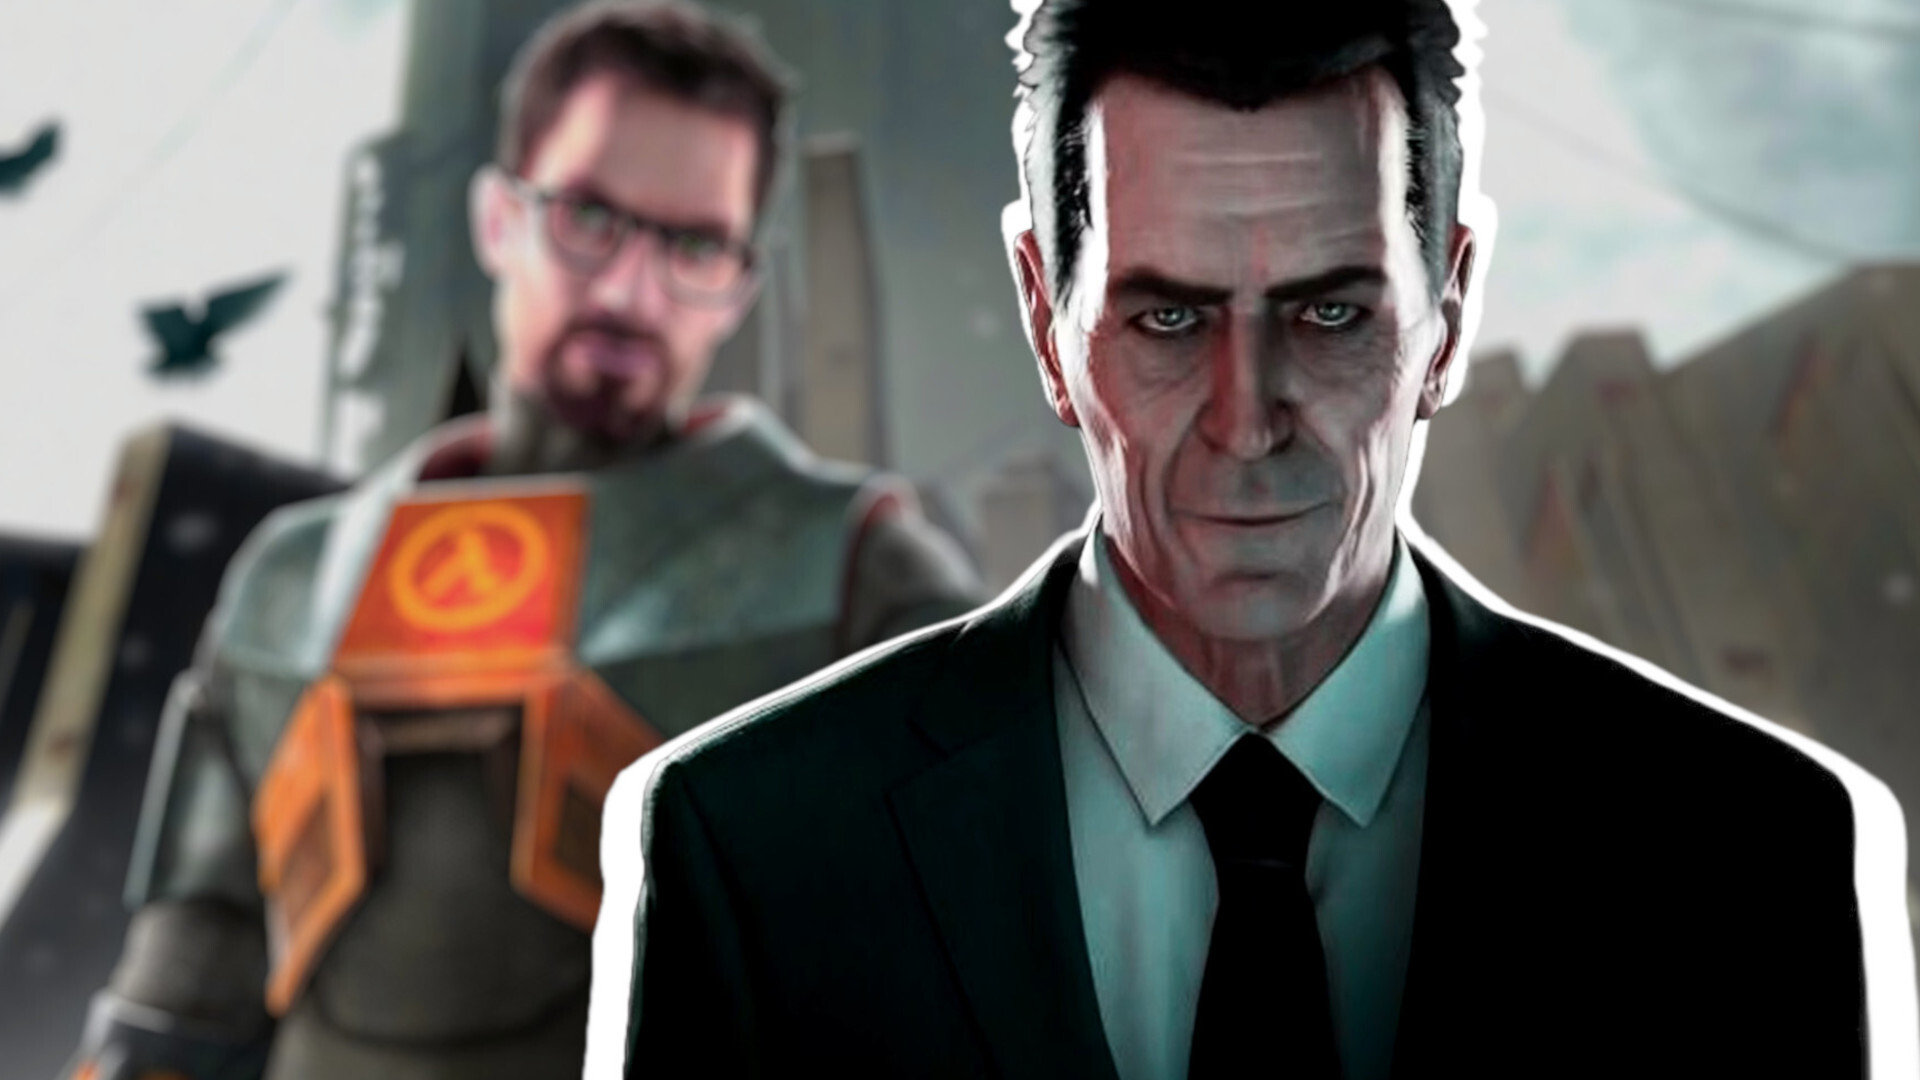 Four years after Alyx, Half-Life 3 is further away than ever before